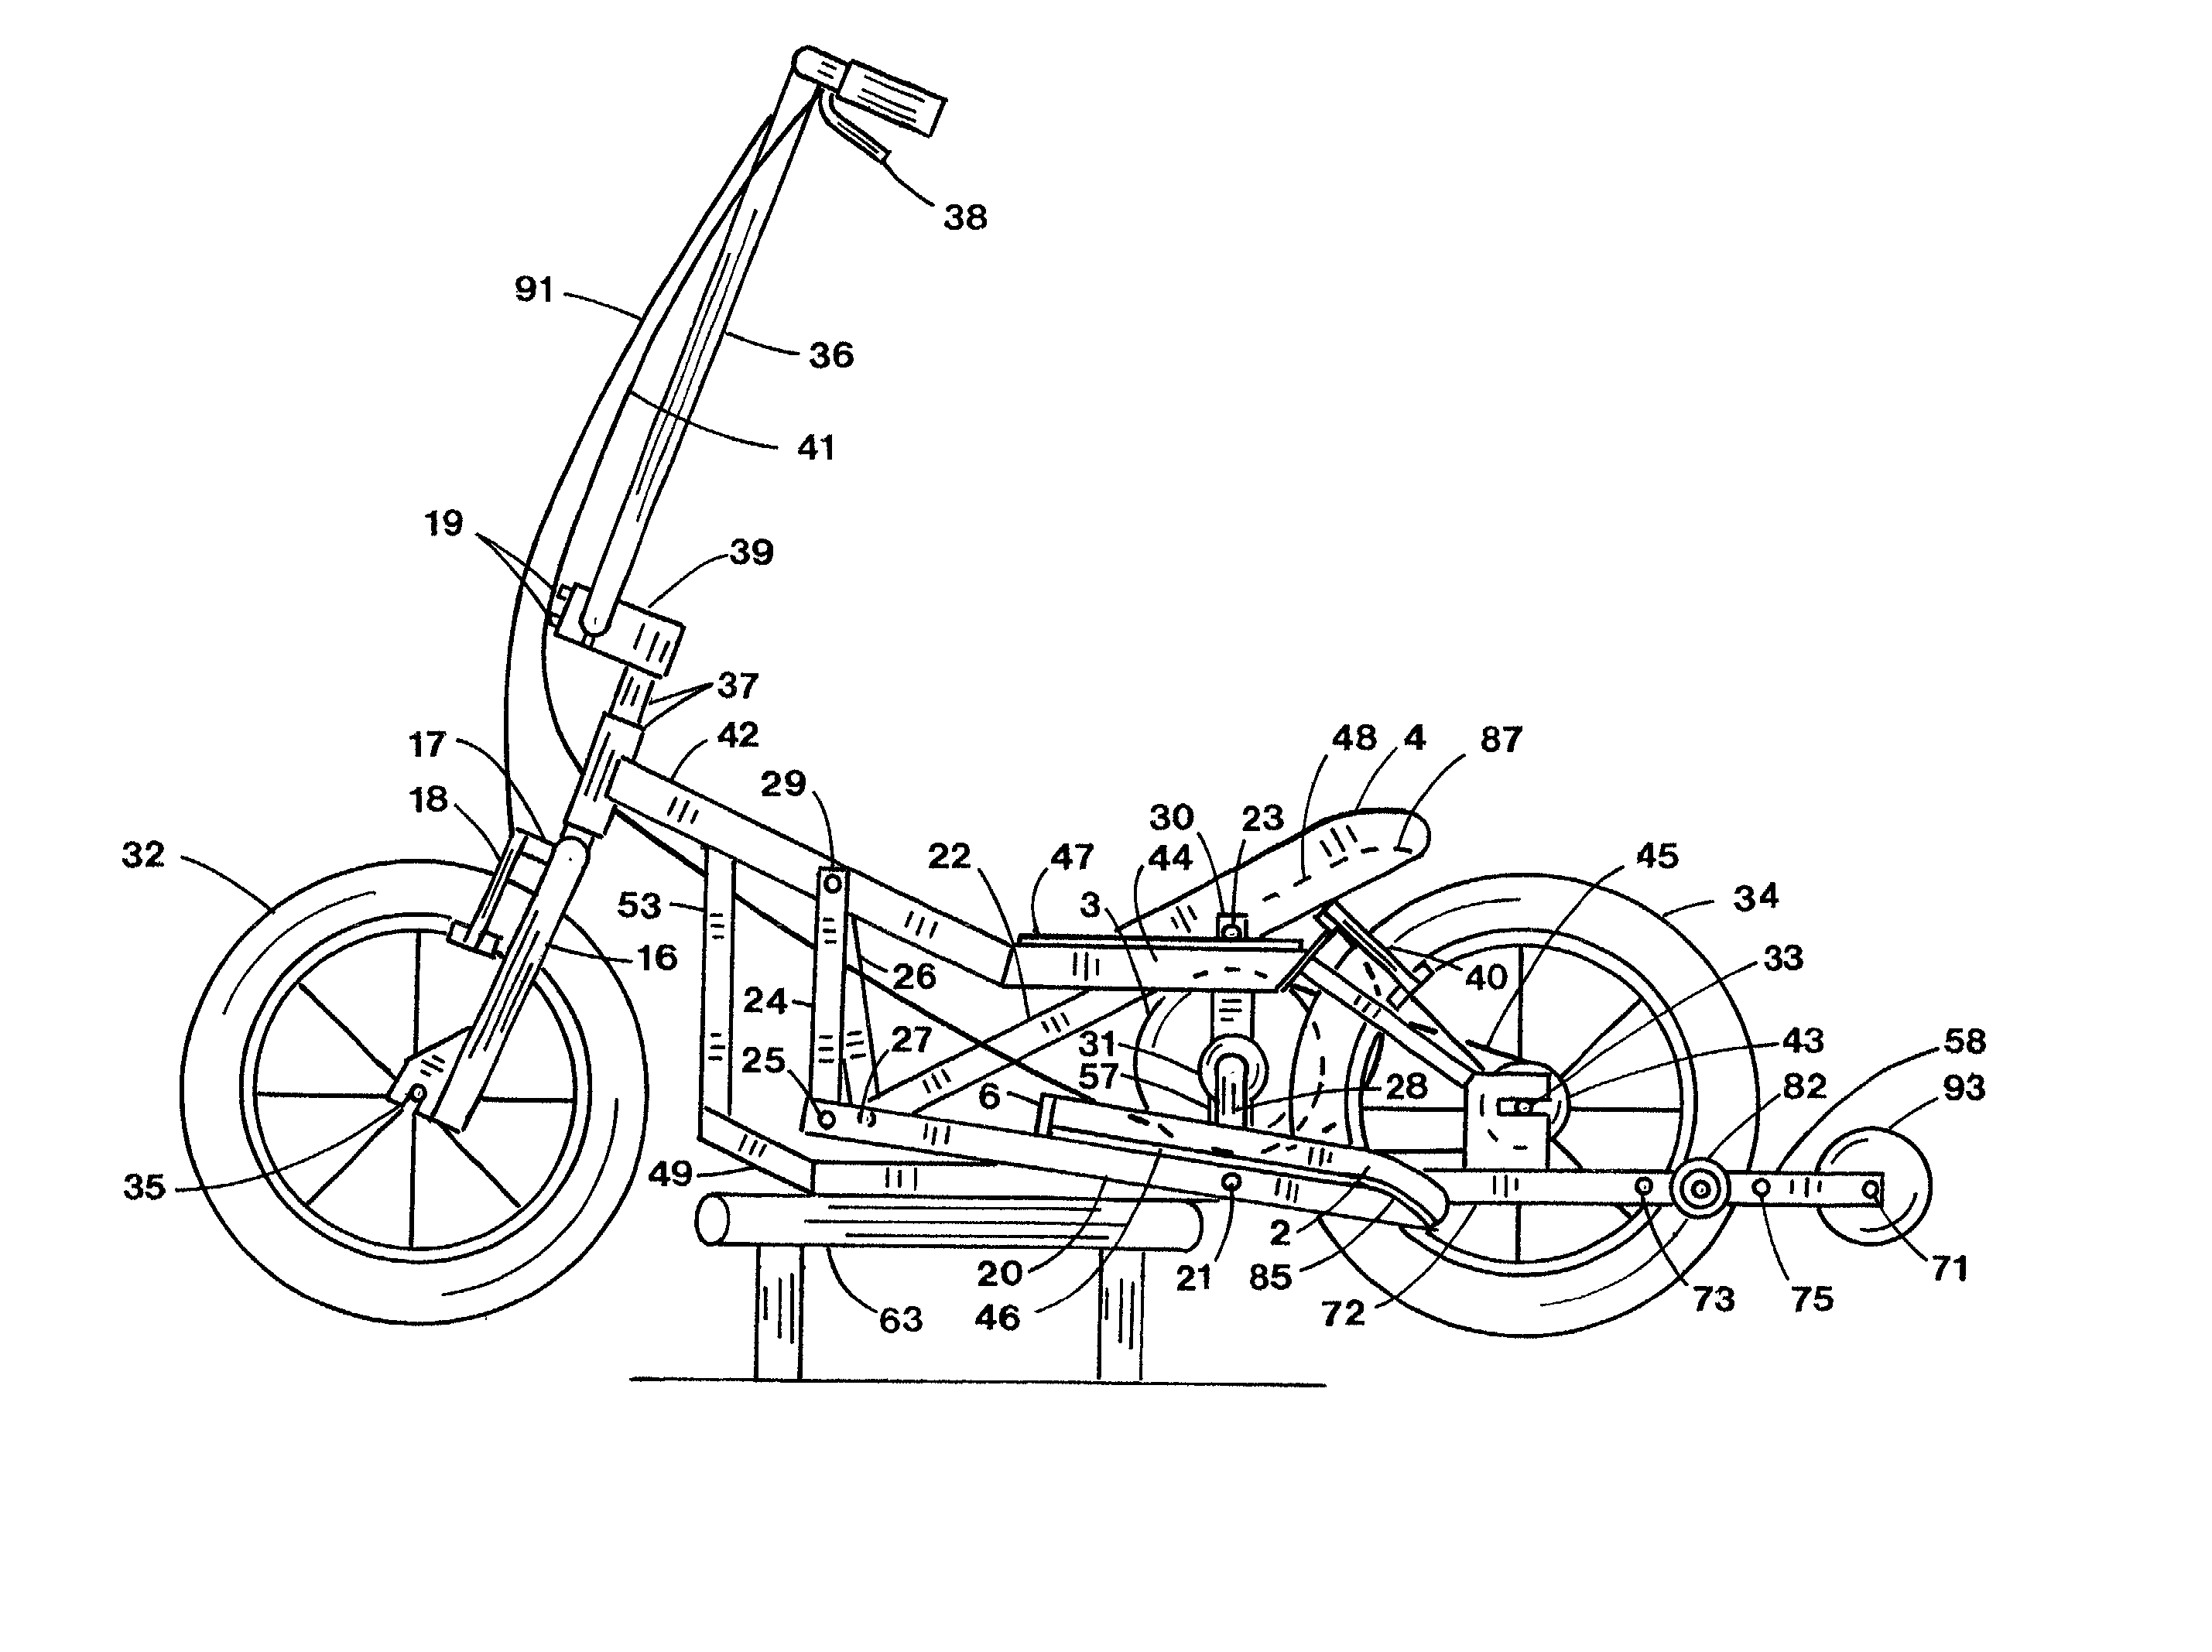 Exercise scooter with stunt features